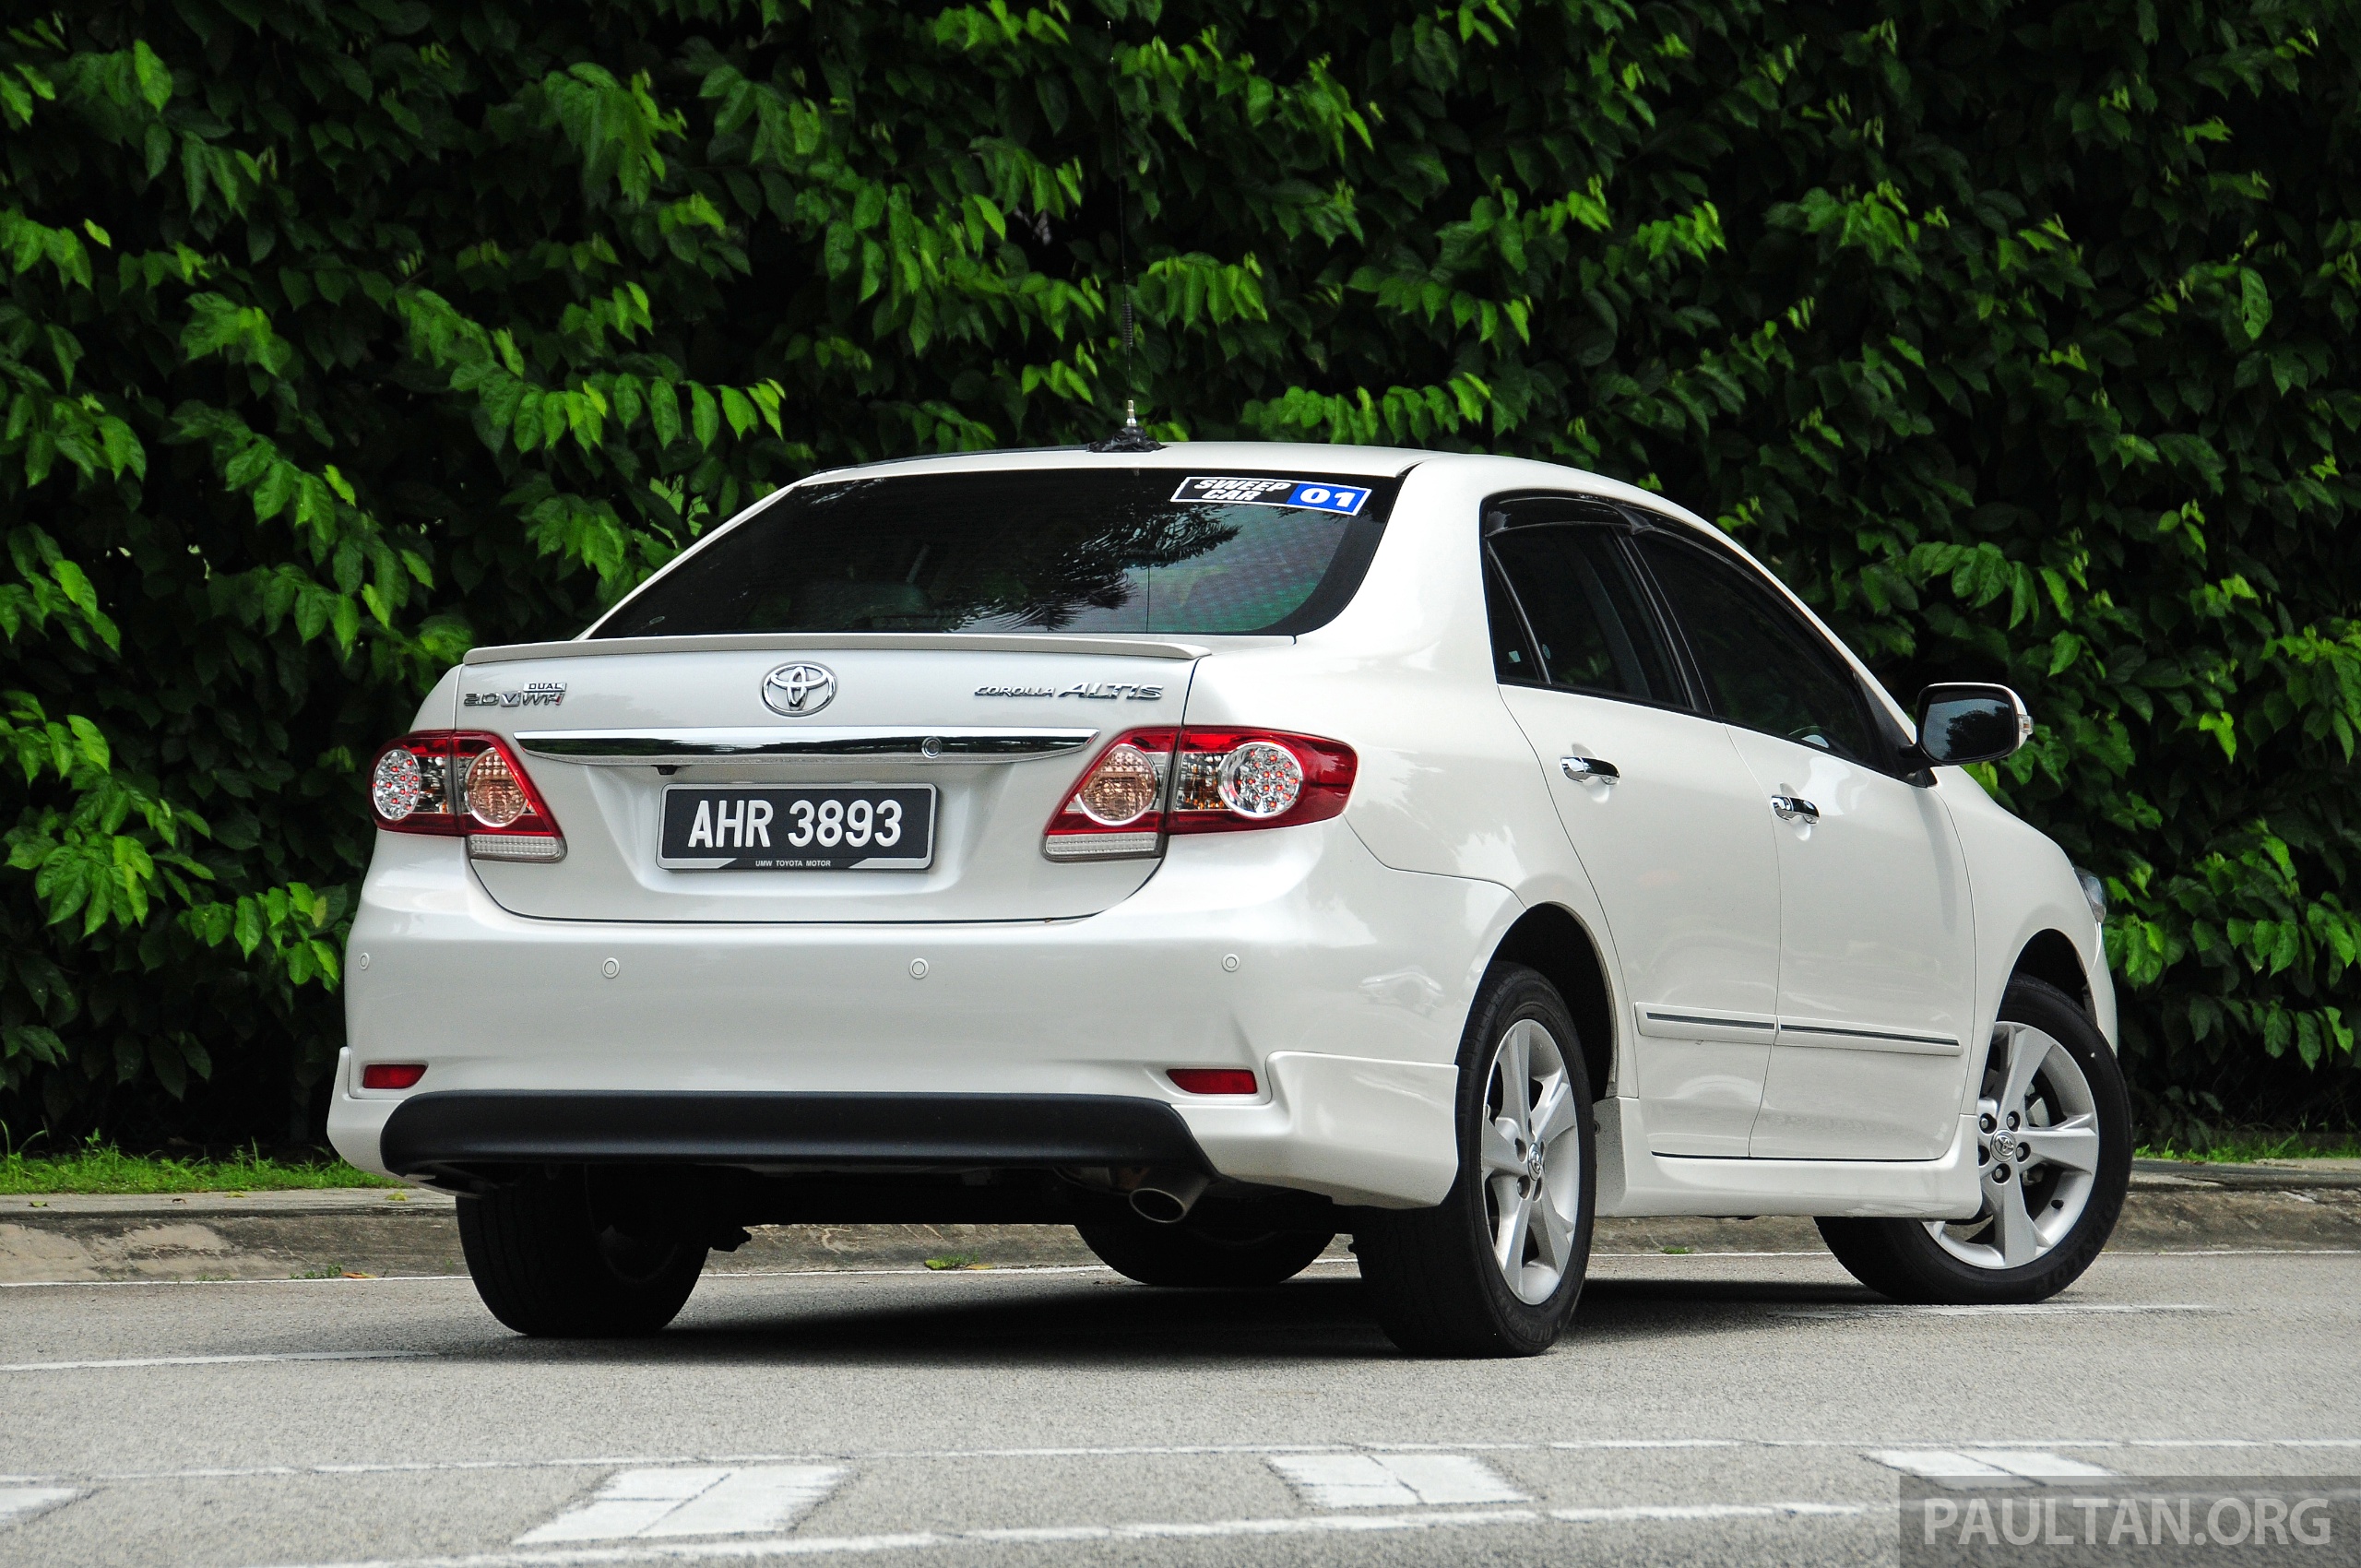 GALLERY: Old and new Toyota Corolla Altis compared Image 222590